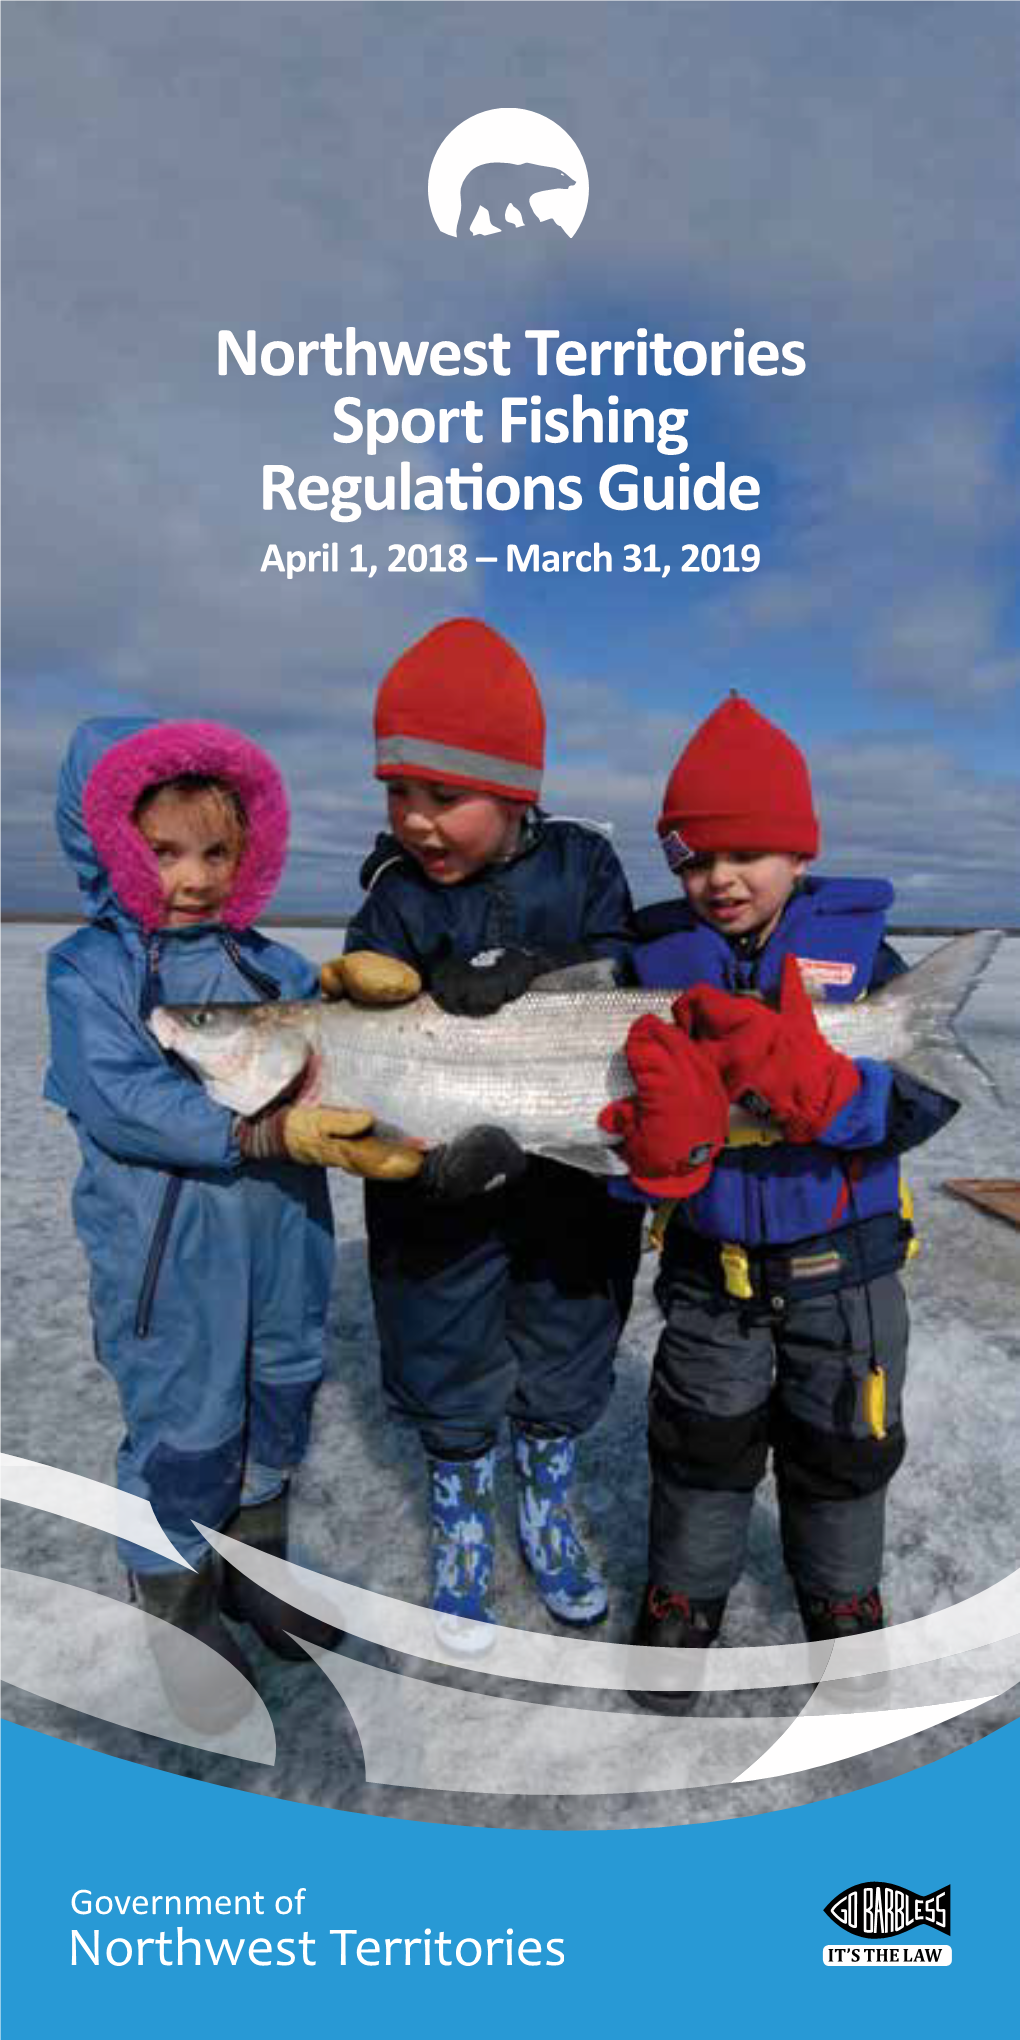 Northwest Territories Sport Fishing Regulations Guide April 1, 2018 – March 31, 2019